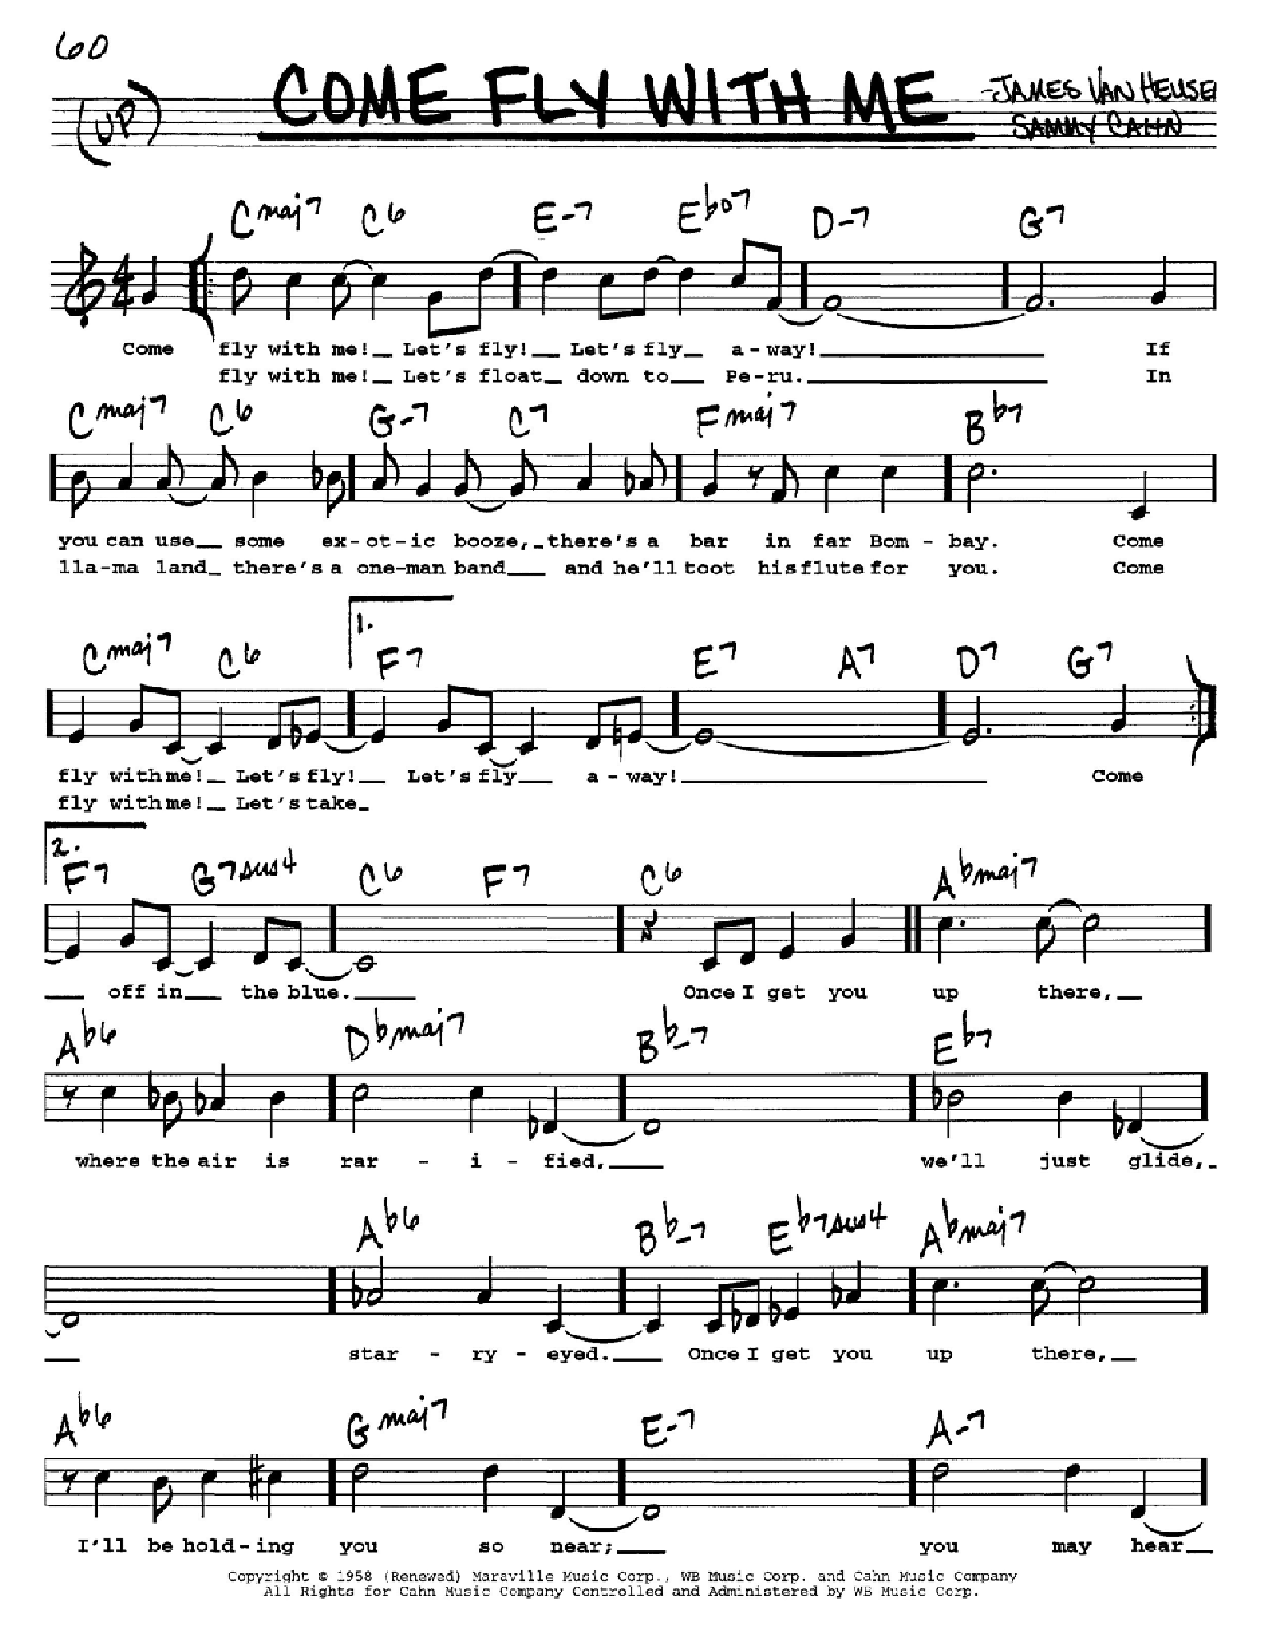 Download Frank Sinatra Come Fly With Me Sheet Music